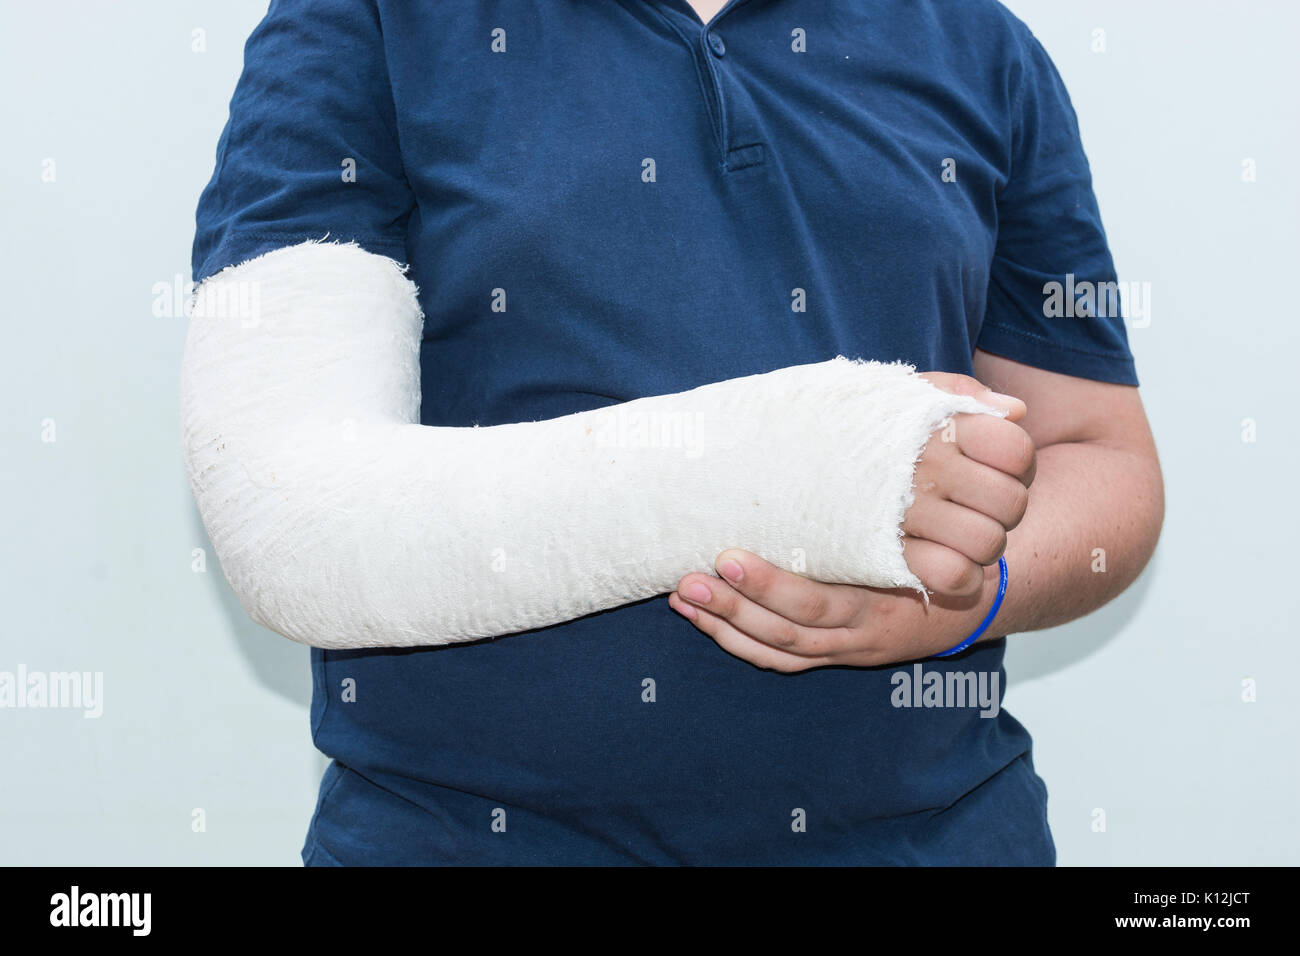 Boy With Broken Arm Plaster On Arm As Therapy Close Up Of A Young Man